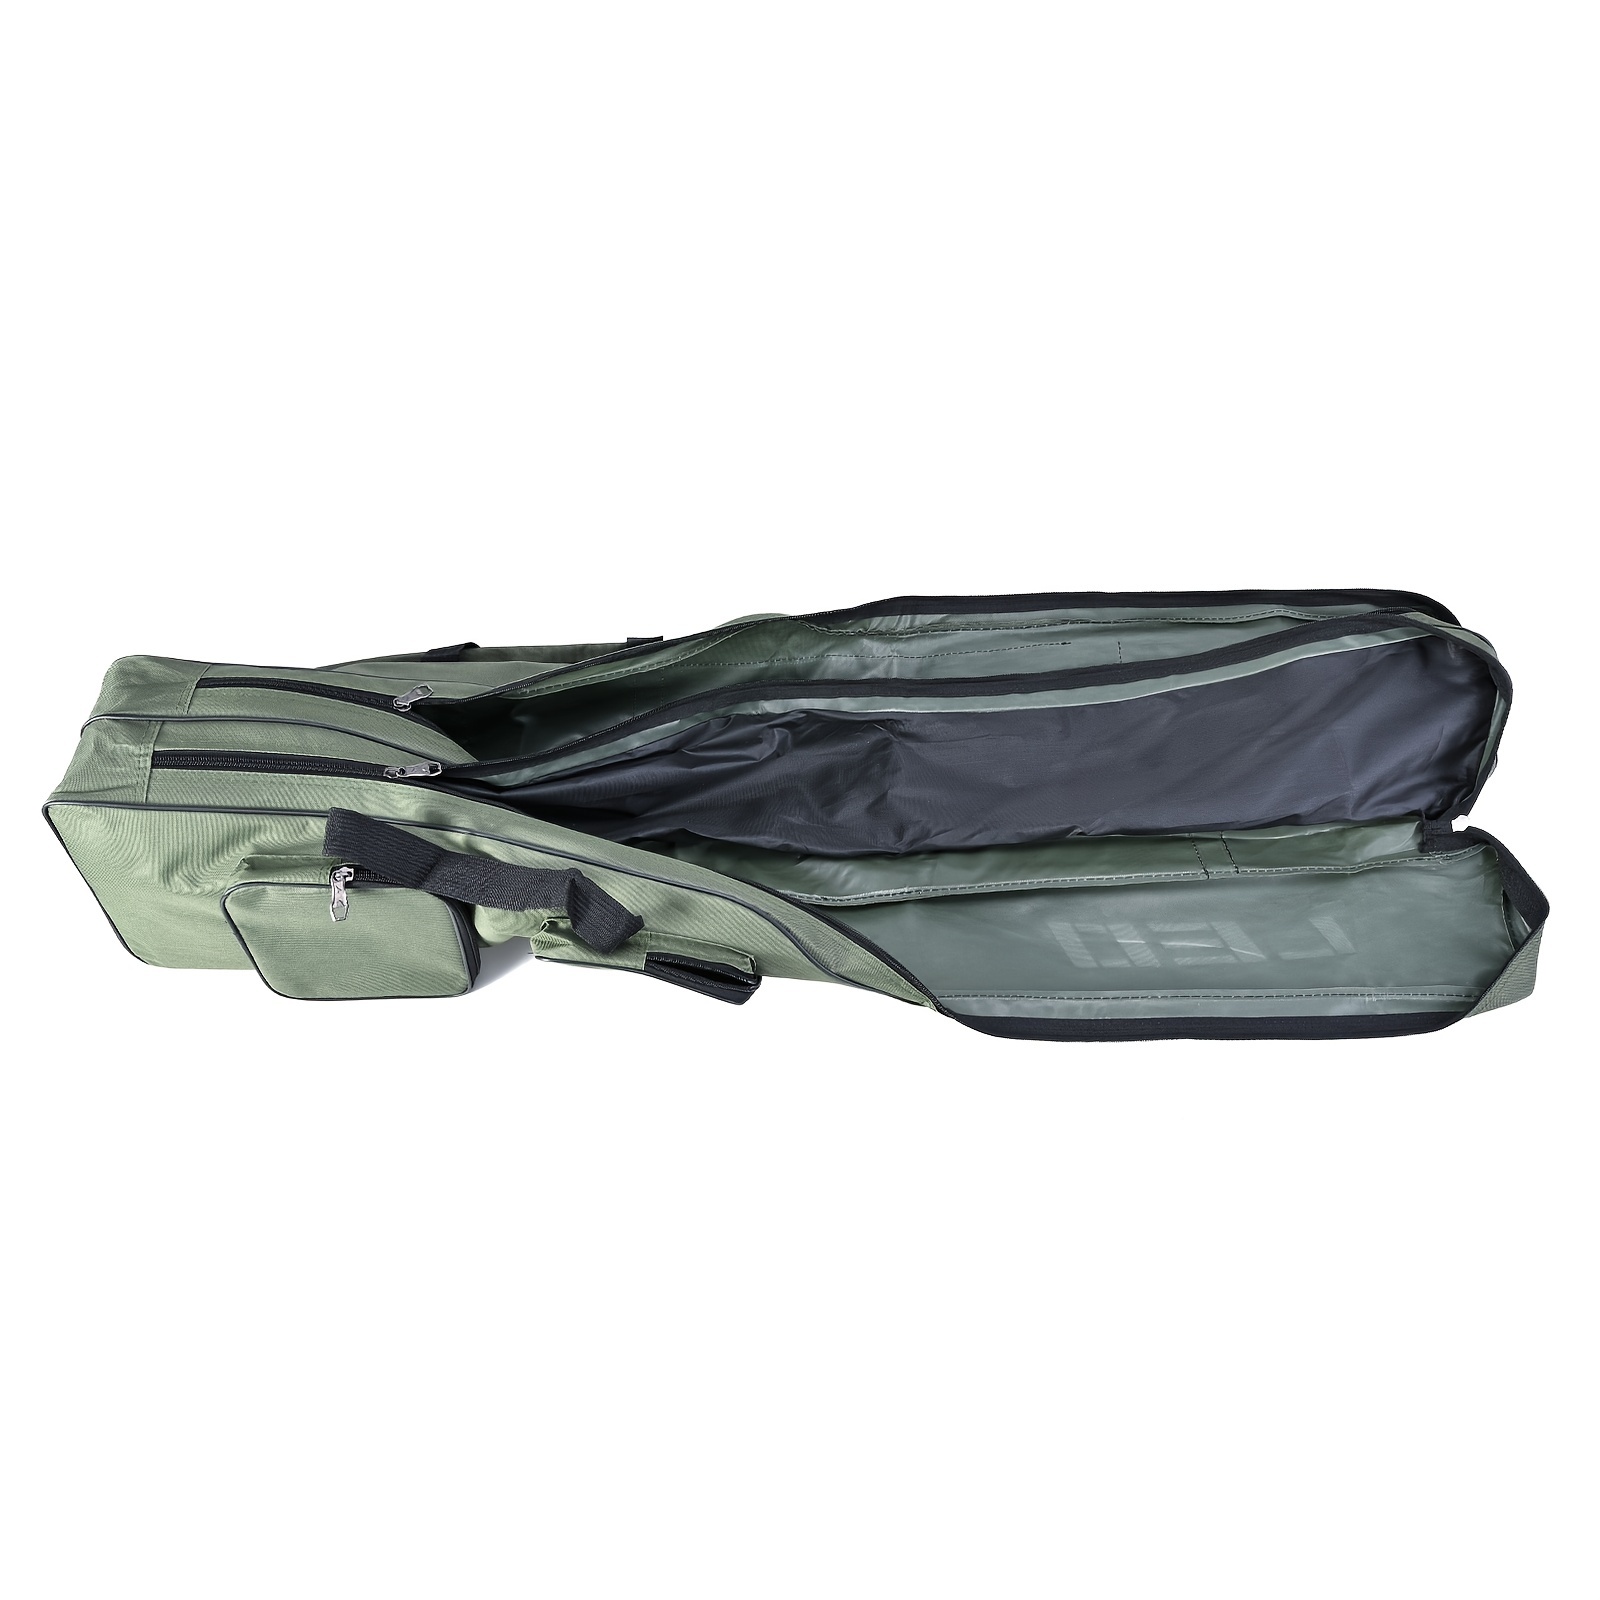 Two Layer 130cm Fishing Rod Reel Bag Fishing Pole Gear Tackle Tool Carry Case  Carrier Travel Bag Storage Bag Organizer Fishing Cover Bag Army green 